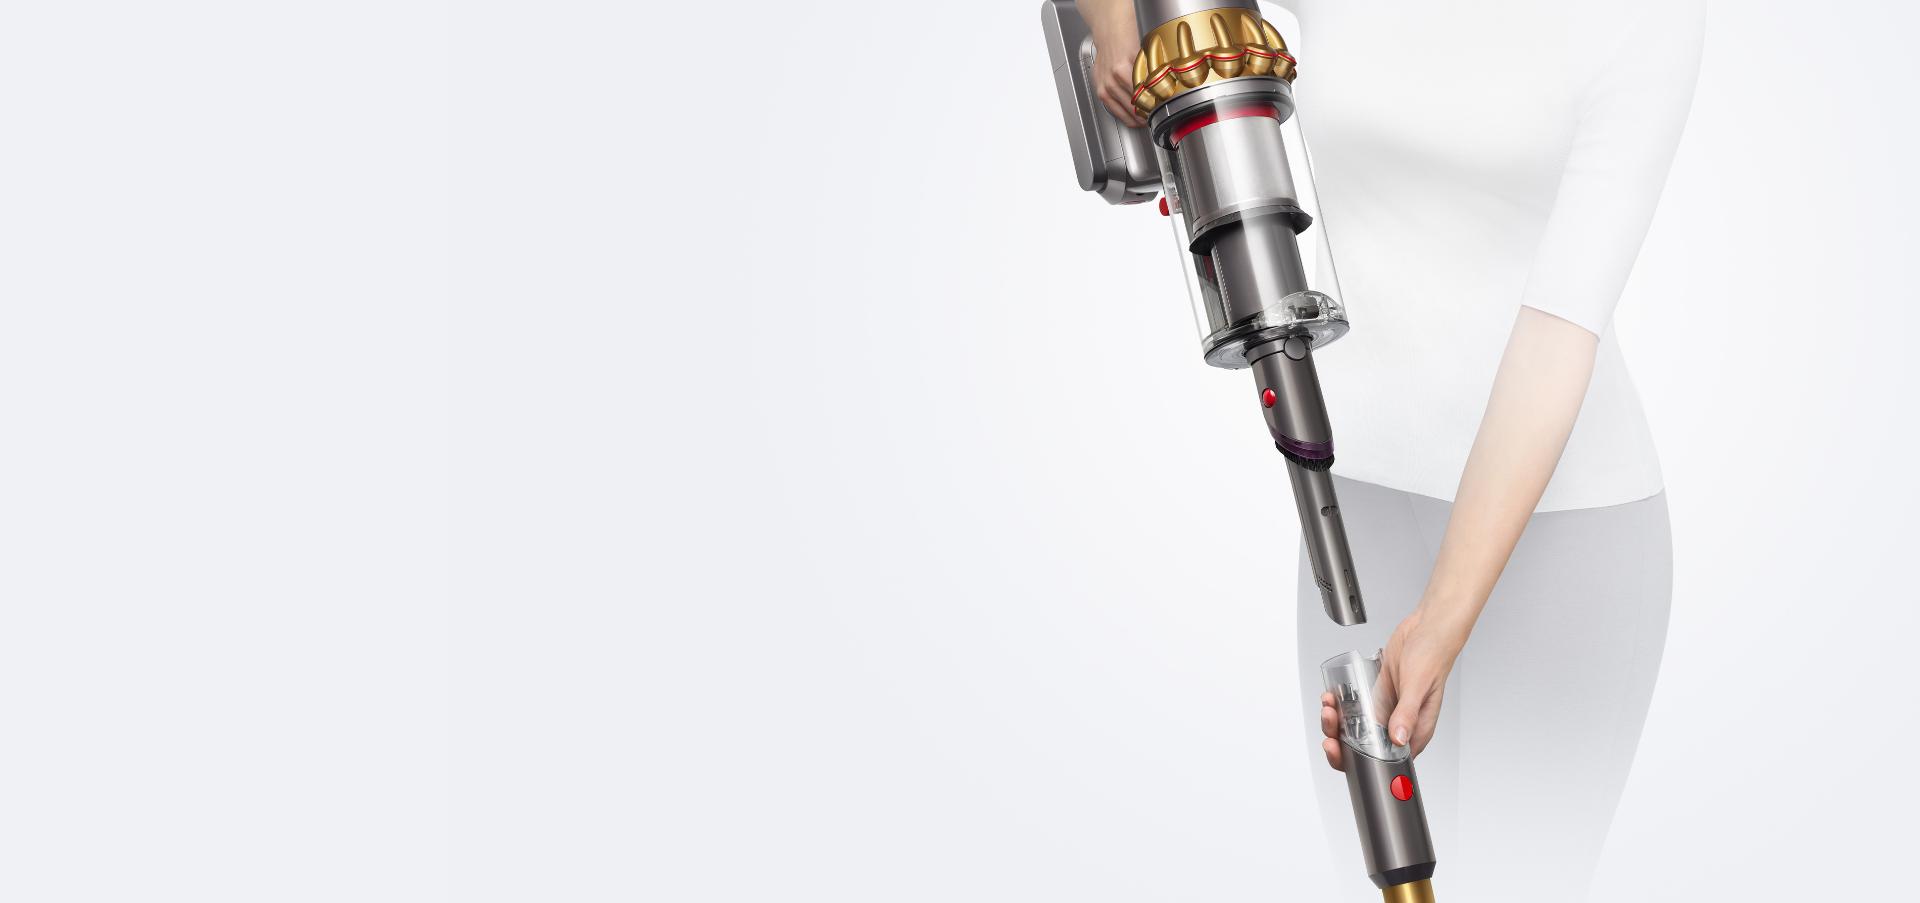 A woman holding the Dyson V15s main body high in one hand while removing the wand with the other revealing the ready-to-go crevice tool.